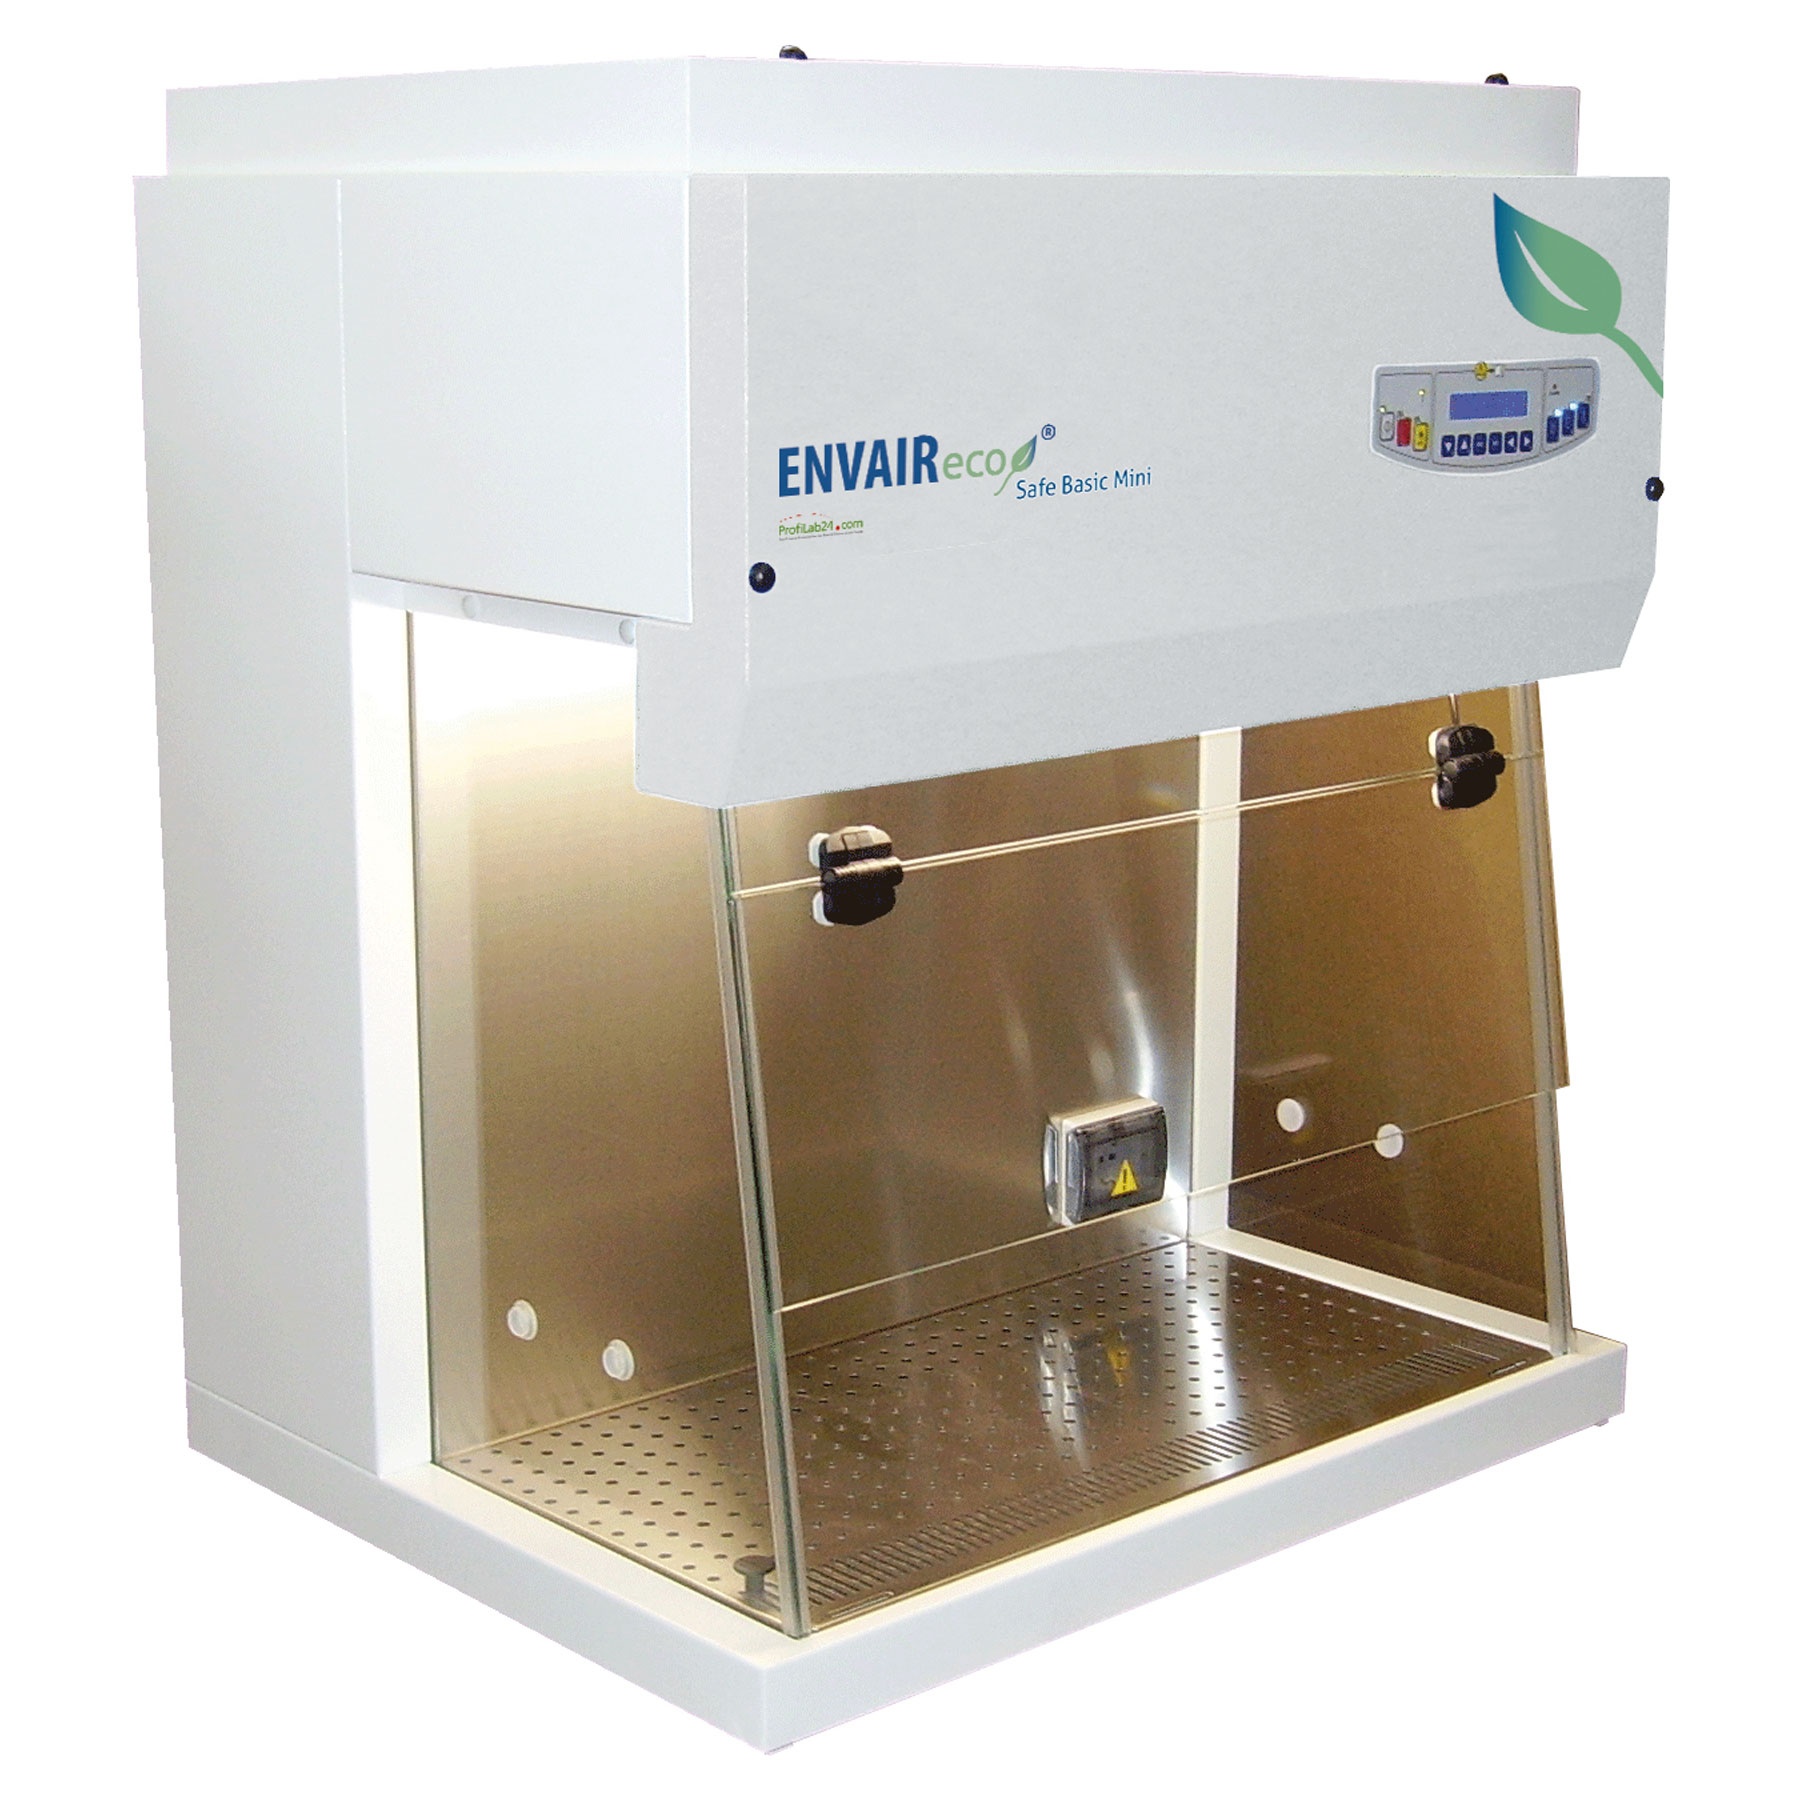 Details about   New LED Mini Laminar Flow Cabinet Protect for Operator & Environment 